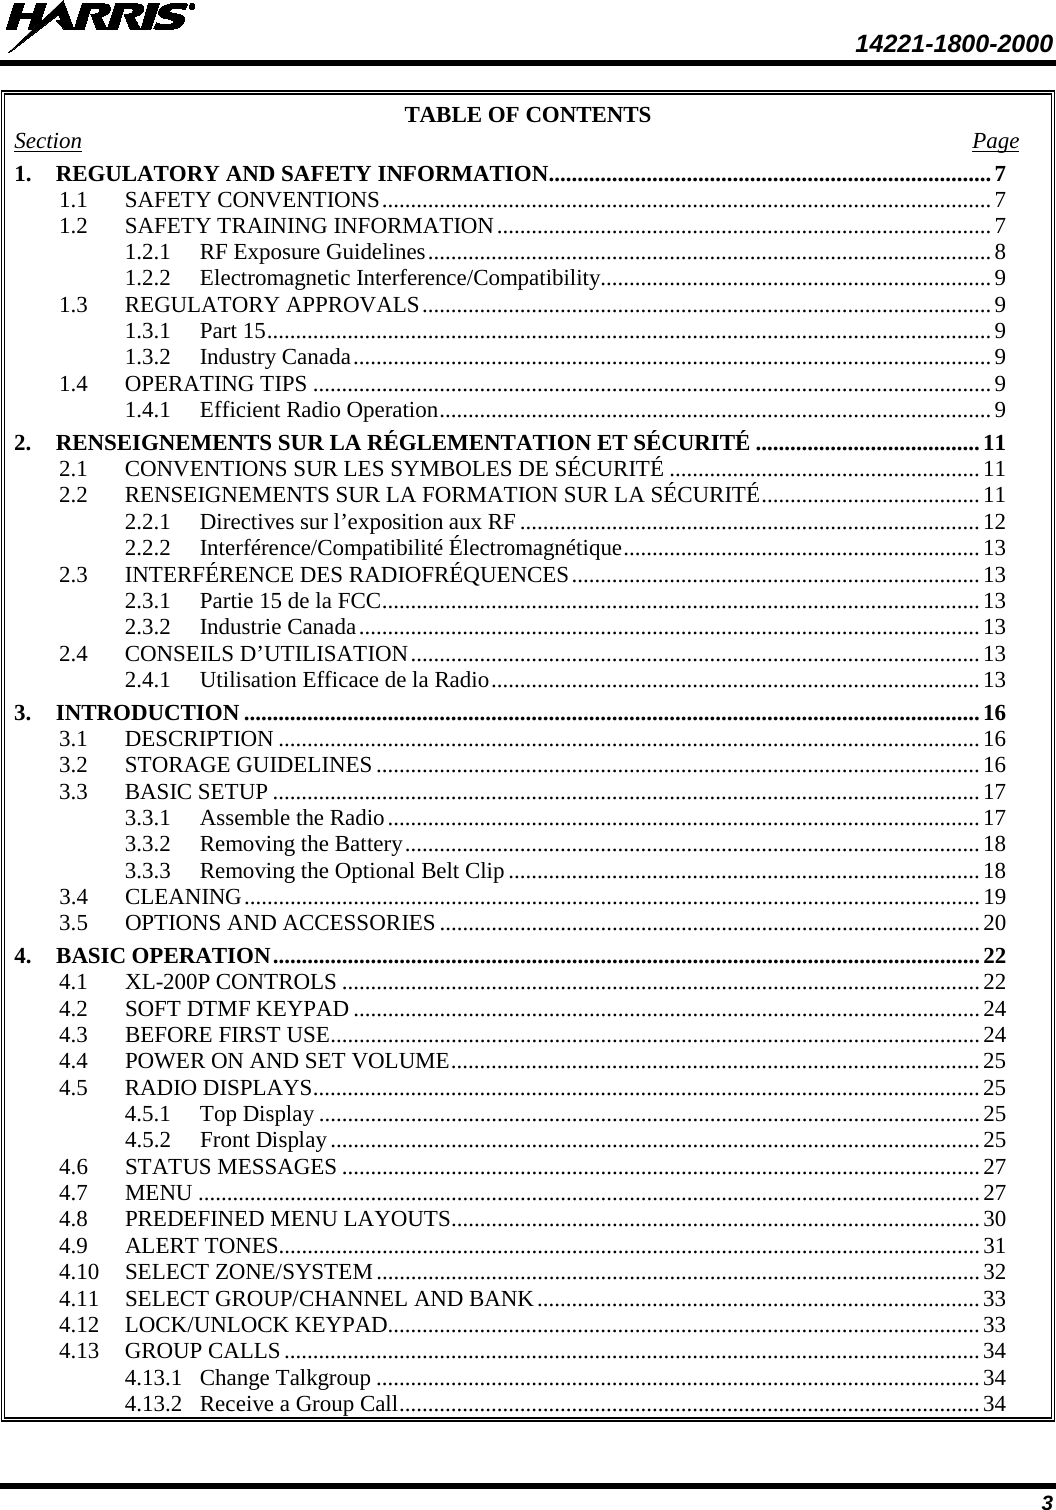  14221-1800-2000 3 TABLE OF CONTENTS Section  Page 1. REGULATORY AND SAFETY INFORMATION ............................................................................. 7 1.1 SAFETY CONVENTIONS .......................................................................................................... 7 1.2 SAFETY TRAINING INFORMATION ...................................................................................... 7 1.2.1 RF Exposure Guidelines .................................................................................................. 8 1.2.2 Electromagnetic Interference/Compatibility .................................................................... 9 1.3 REGULATORY APPROVALS ................................................................................................... 9 1.3.1 Part 15 .............................................................................................................................. 9 1.3.2 Industry Canada ............................................................................................................... 9 1.4 OPERATING TIPS ...................................................................................................................... 9 1.4.1 Efficient Radio Operation ................................................................................................ 9 2. RENSEIGNEMENTS SUR LA RÉGLEMENTATION ET SÉCURITÉ ....................................... 11 2.1 CONVENTIONS SUR LES SYMBOLES DE SÉCURITÉ ...................................................... 11 2.2 RENSEIGNEMENTS SUR LA FORMATION SUR LA SÉCURITÉ ...................................... 11 2.2.1 Directives sur l’exposition aux RF ................................................................................ 12 2.2.2 Interférence/Compatibilité Électromagnétique .............................................................. 13 2.3 INTERFÉRENCE DES RADIOFRÉQUENCES ....................................................................... 13 2.3.1 Partie 15 de la FCC ........................................................................................................ 13 2.3.2 Industrie Canada ............................................................................................................ 13 2.4 CONSEILS D’UTILISATION ................................................................................................... 13 2.4.1 Utilisation Efficace de la Radio ..................................................................................... 13 3. INTRODUCTION ................................................................................................................................ 16 3.1 DESCRIPTION .......................................................................................................................... 16 3.2 STORAGE GUIDELINES ......................................................................................................... 16 3.3 BASIC SETUP ........................................................................................................................... 17 3.3.1 Assemble the Radio ....................................................................................................... 17 3.3.2 Removing the Battery .................................................................................................... 18 3.3.3 Removing the Optional Belt Clip .................................................................................. 18 3.4 CLEANING ................................................................................................................................ 19 3.5 OPTIONS AND ACCESSORIES .............................................................................................. 20 4. BASIC OPERATION ........................................................................................................................... 22 4.1 XL-200P CONTROLS ............................................................................................................... 22 4.2 SOFT DTMF KEYPAD ............................................................................................................. 24 4.3 BEFORE FIRST USE ................................................................................................................. 24 4.4 POWER ON AND SET VOLUME ............................................................................................ 25 4.5 RADIO DISPLAYS .................................................................................................................... 25 4.5.1 Top Display ................................................................................................................... 25 4.5.2 Front Display ................................................................................................................. 25 4.6 STATUS MESSAGES ............................................................................................................... 27 4.7 MENU ........................................................................................................................................ 27 4.8 PREDEFINED MENU LAYOUTS............................................................................................ 30 4.9 ALERT TONES.......................................................................................................................... 31 4.10 SELECT ZONE/SYSTEM ......................................................................................................... 32 4.11 SELECT GROUP/CHANNEL AND BANK ............................................................................. 33 4.12 LOCK/UNLOCK KEYPAD....................................................................................................... 33 4.13 GROUP CALLS ......................................................................................................................... 34 4.13.1 Change Talkgroup ......................................................................................................... 34 4.13.2 Receive a Group Call ..................................................................................................... 34 